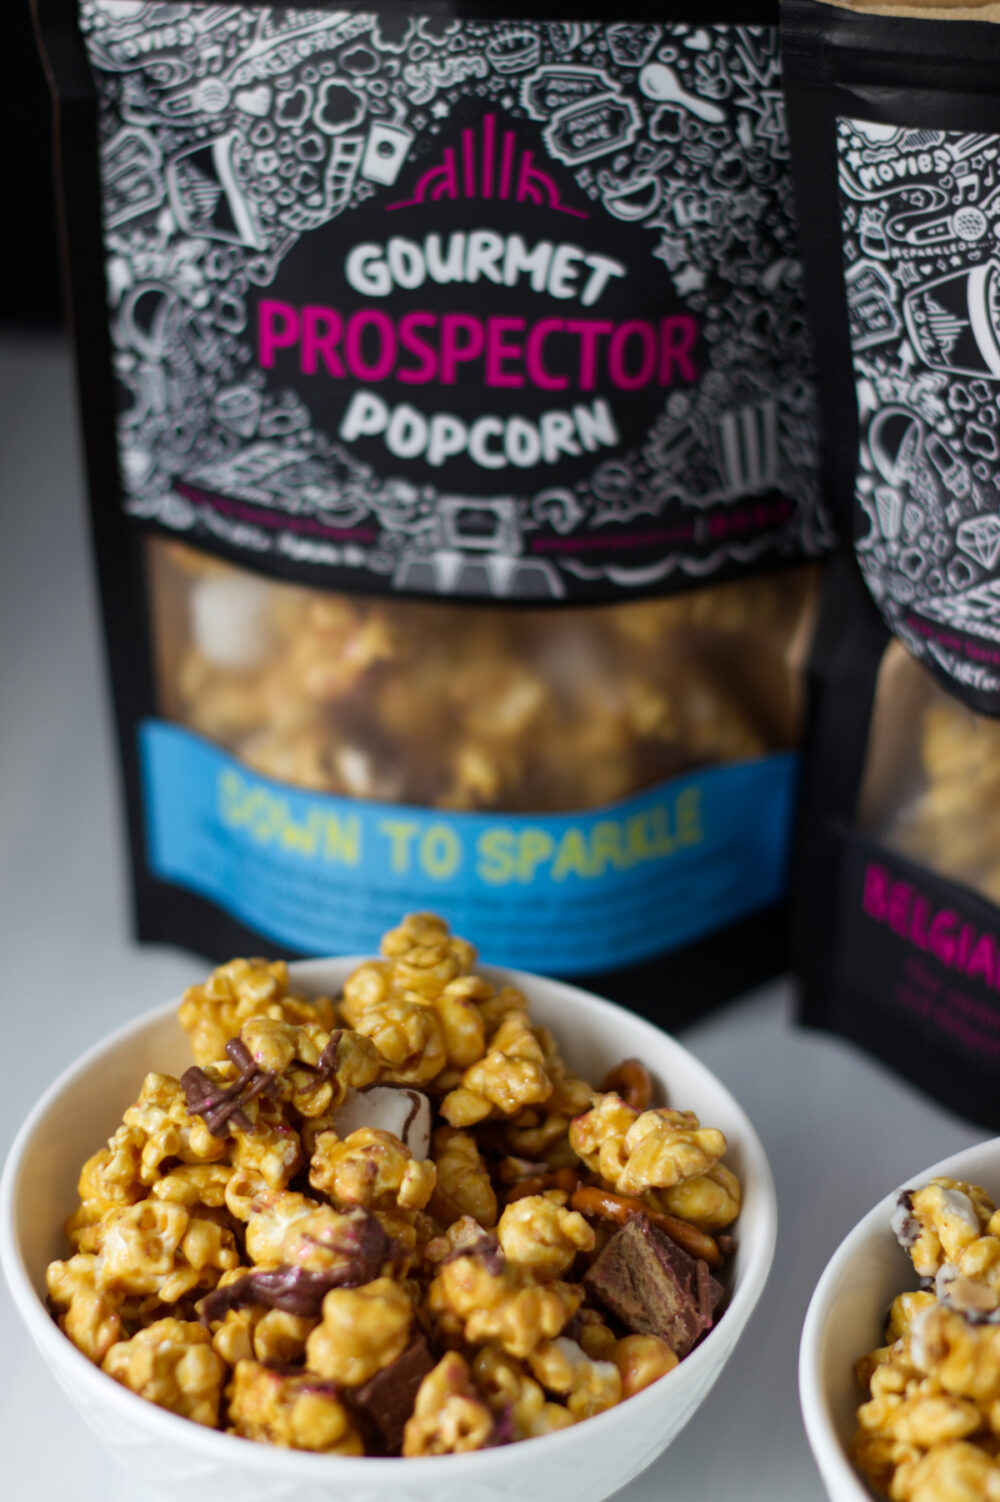 Down to sparkle popcorn in a bowl and the bag. 